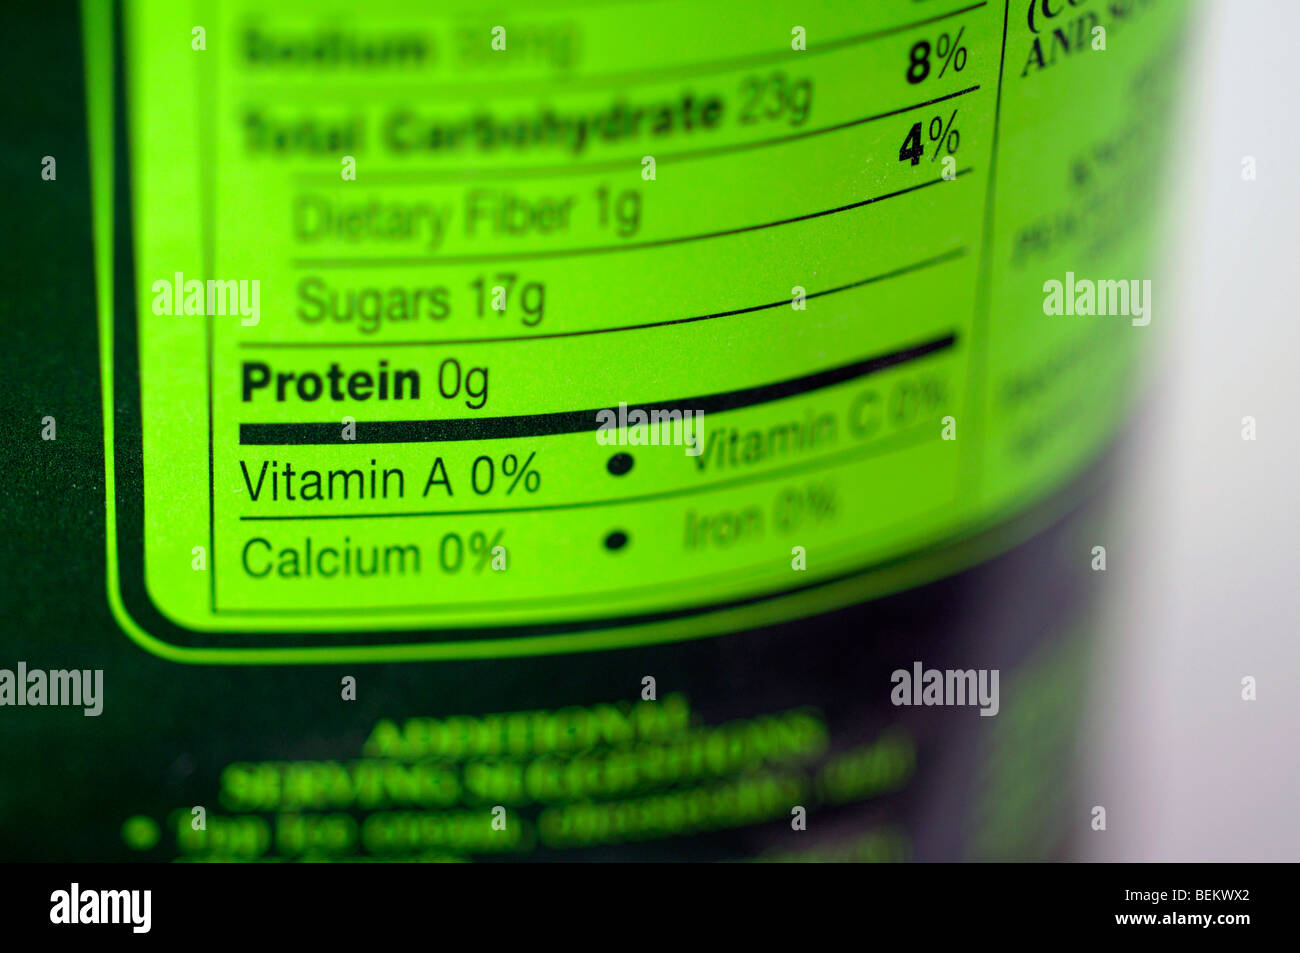 Nutrition information Stock Photo